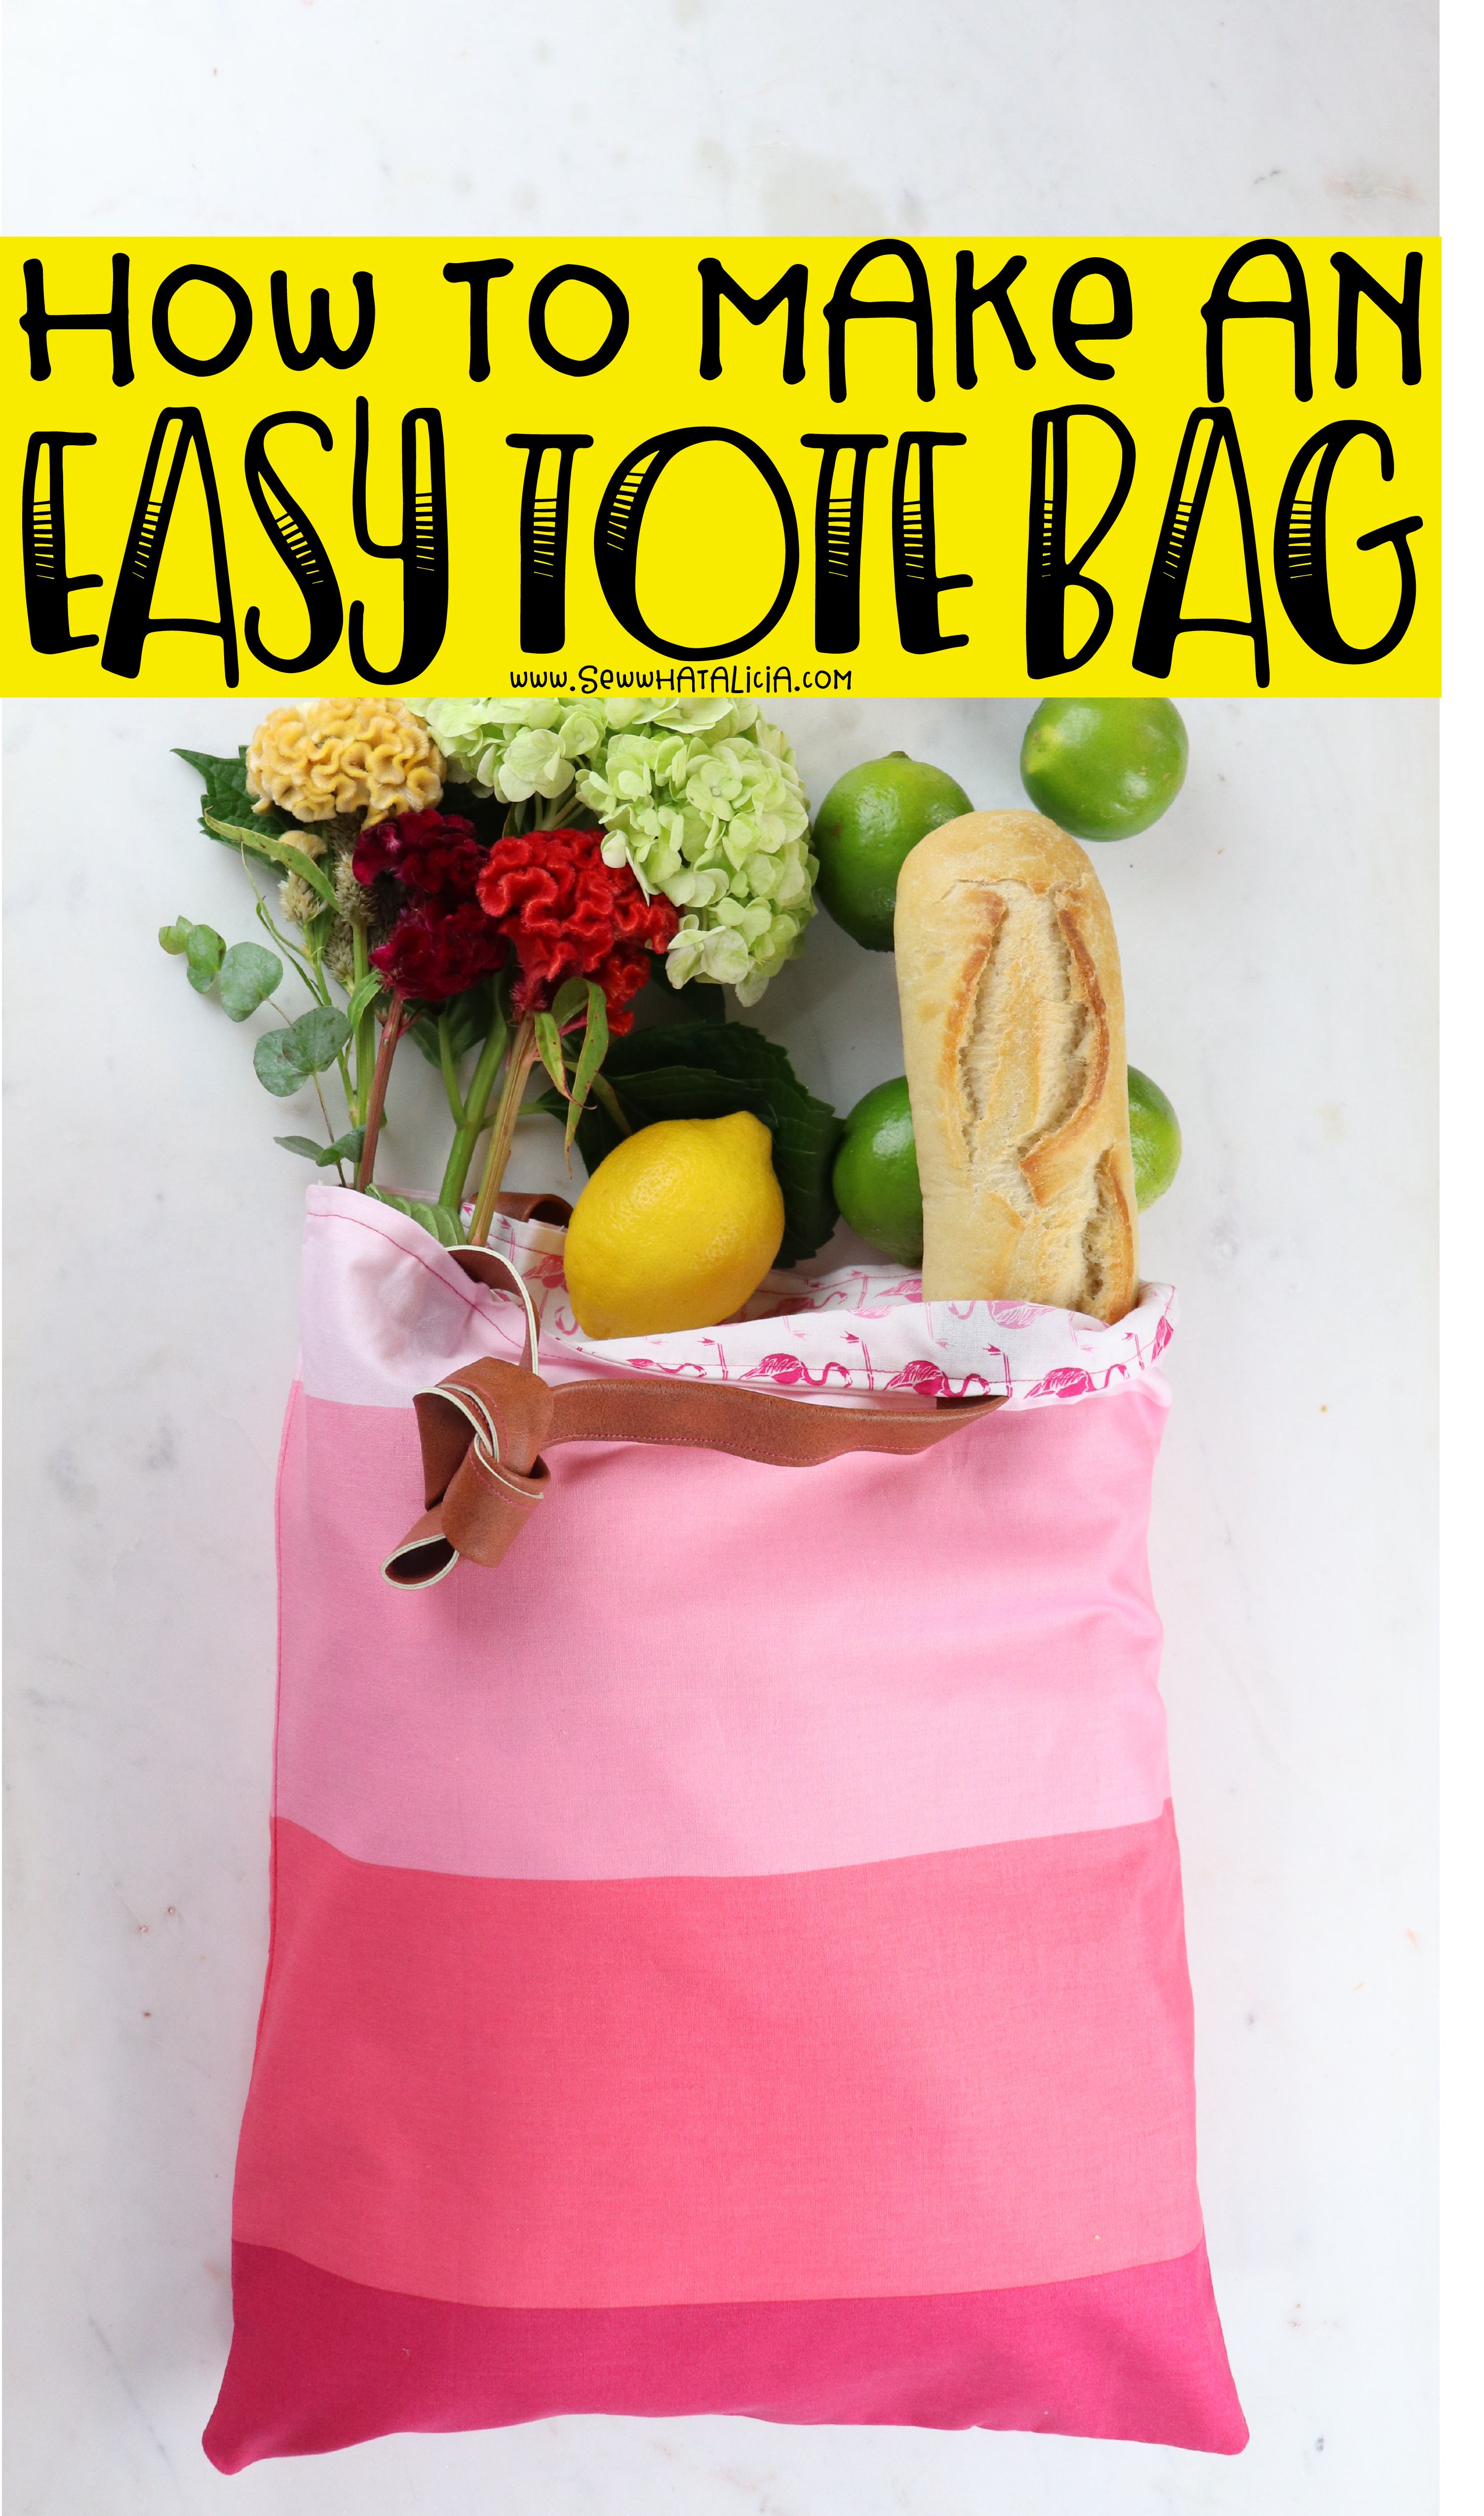 How to Make a Tote Bag: This installment of the 15 minute sewing series has us creating an easy lined tote bag. This is a great beginner sewing project. Newbies will learn to create an easy tote pattern. Click through for the full tutorial. | www.sewwwhatalicia.com